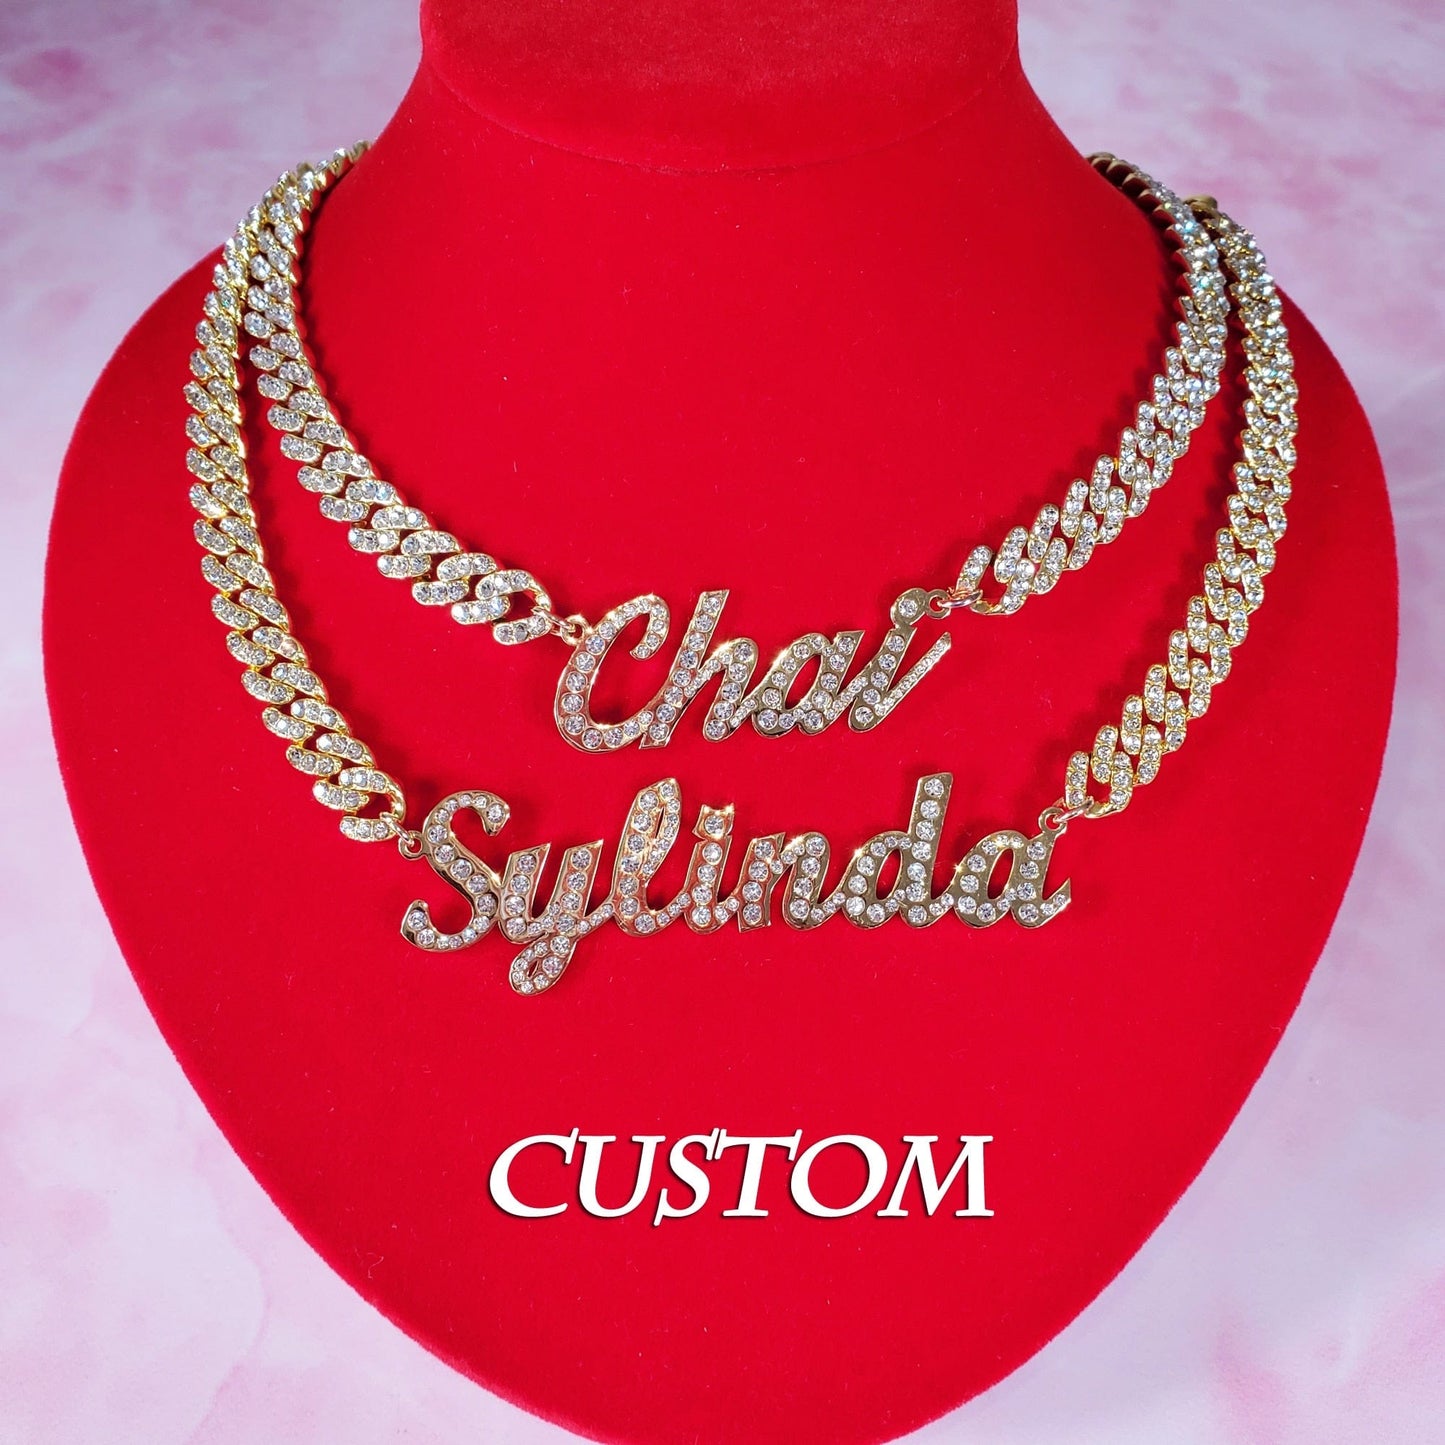 'Such A Show Off' Personalized Cursive Name Choker Necklaces by BlingxAddict | BlingxAddict